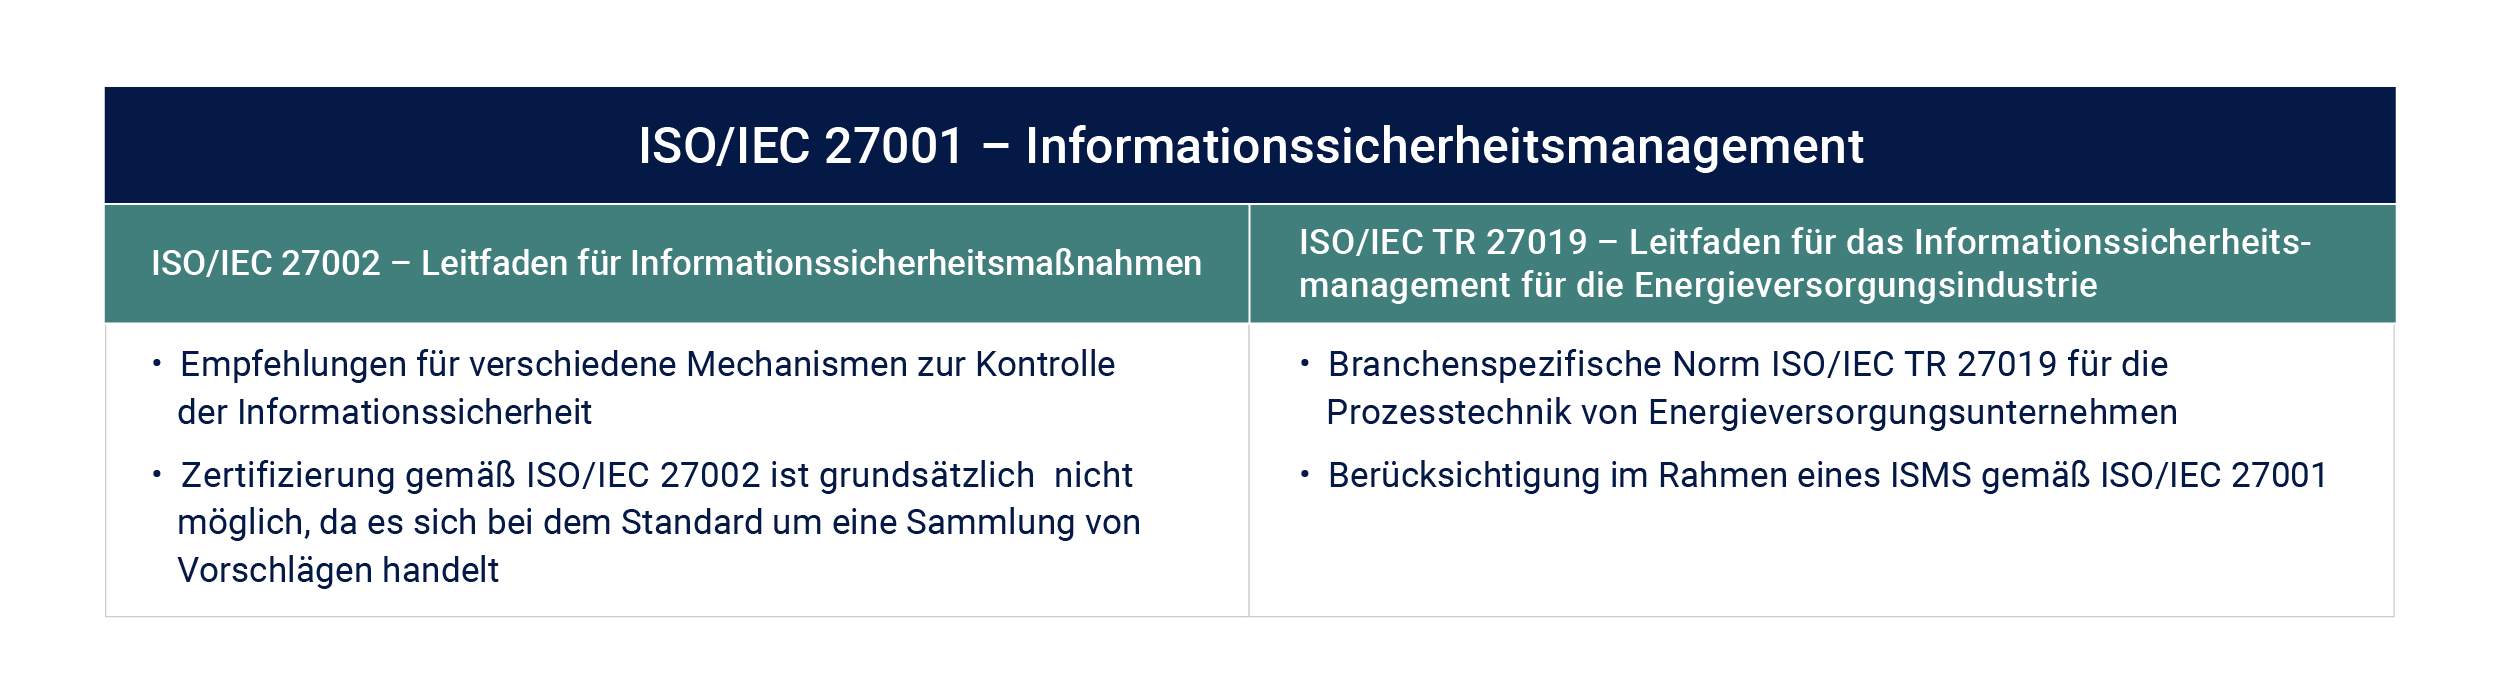 iso 27019